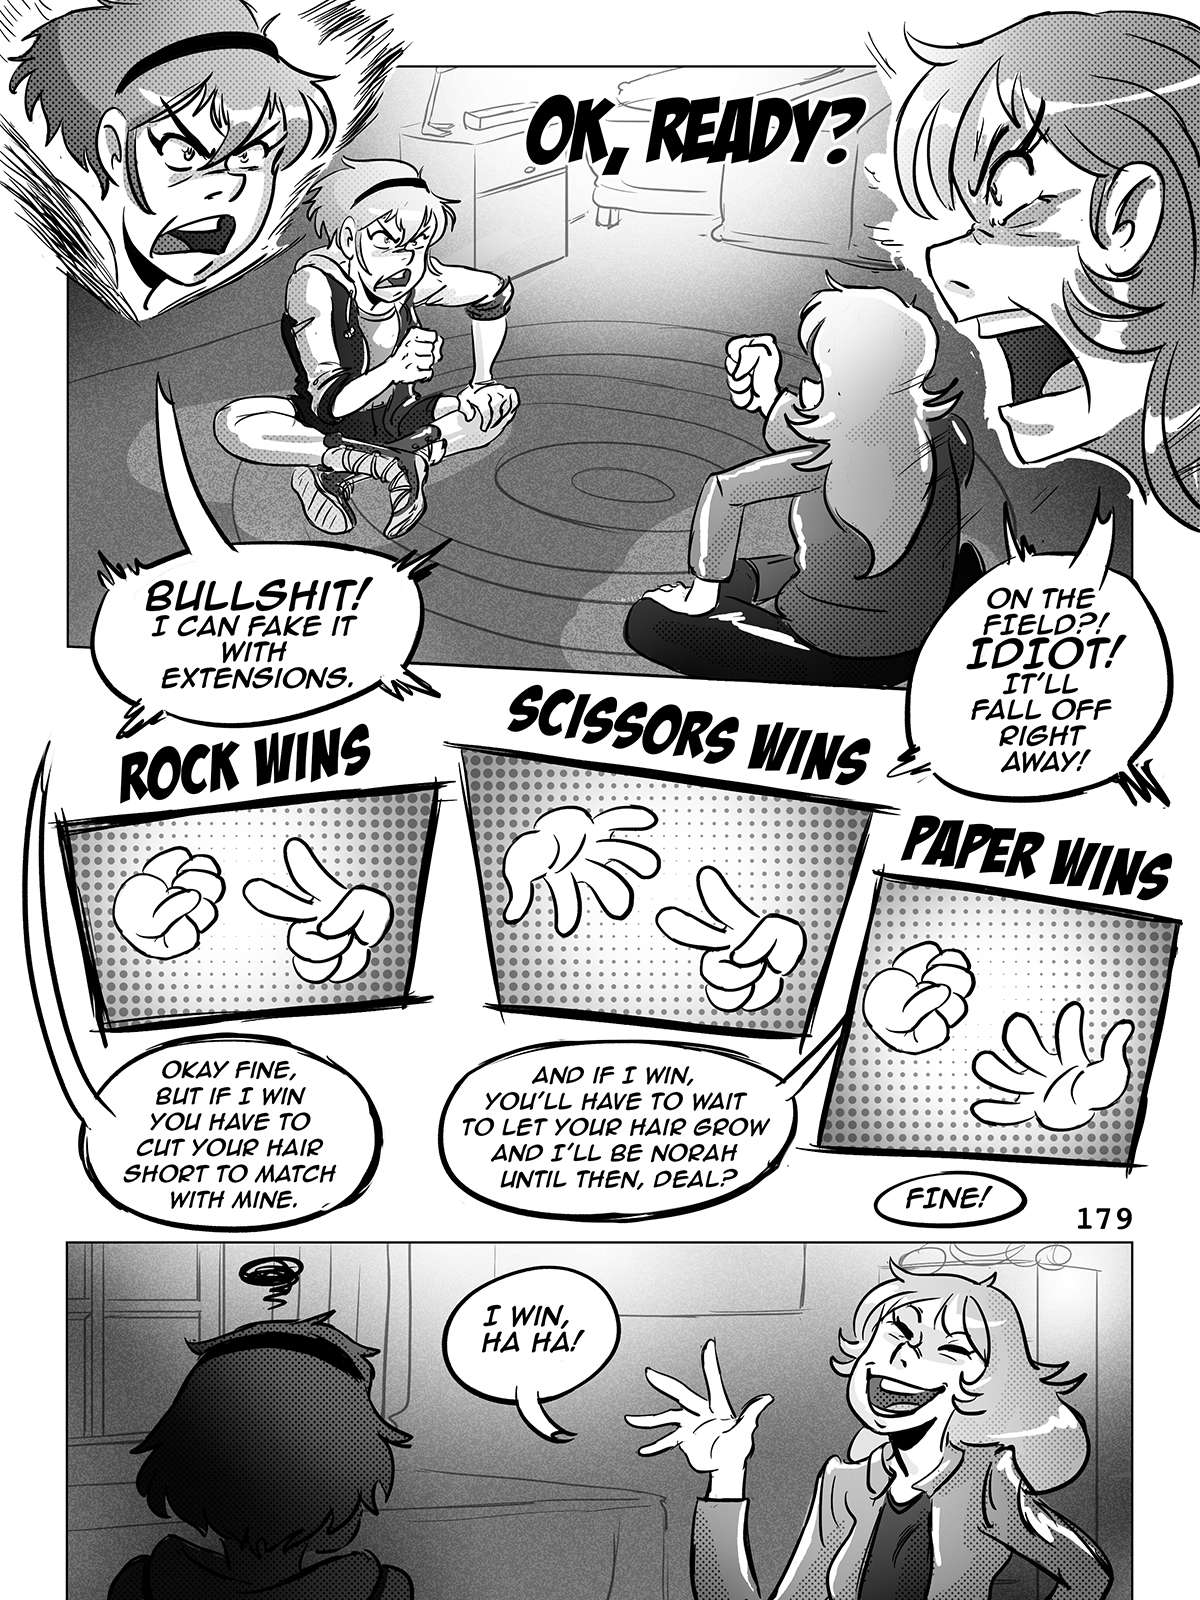 Hockey, Love, & GUTS! – Chapter 8 – Page 179